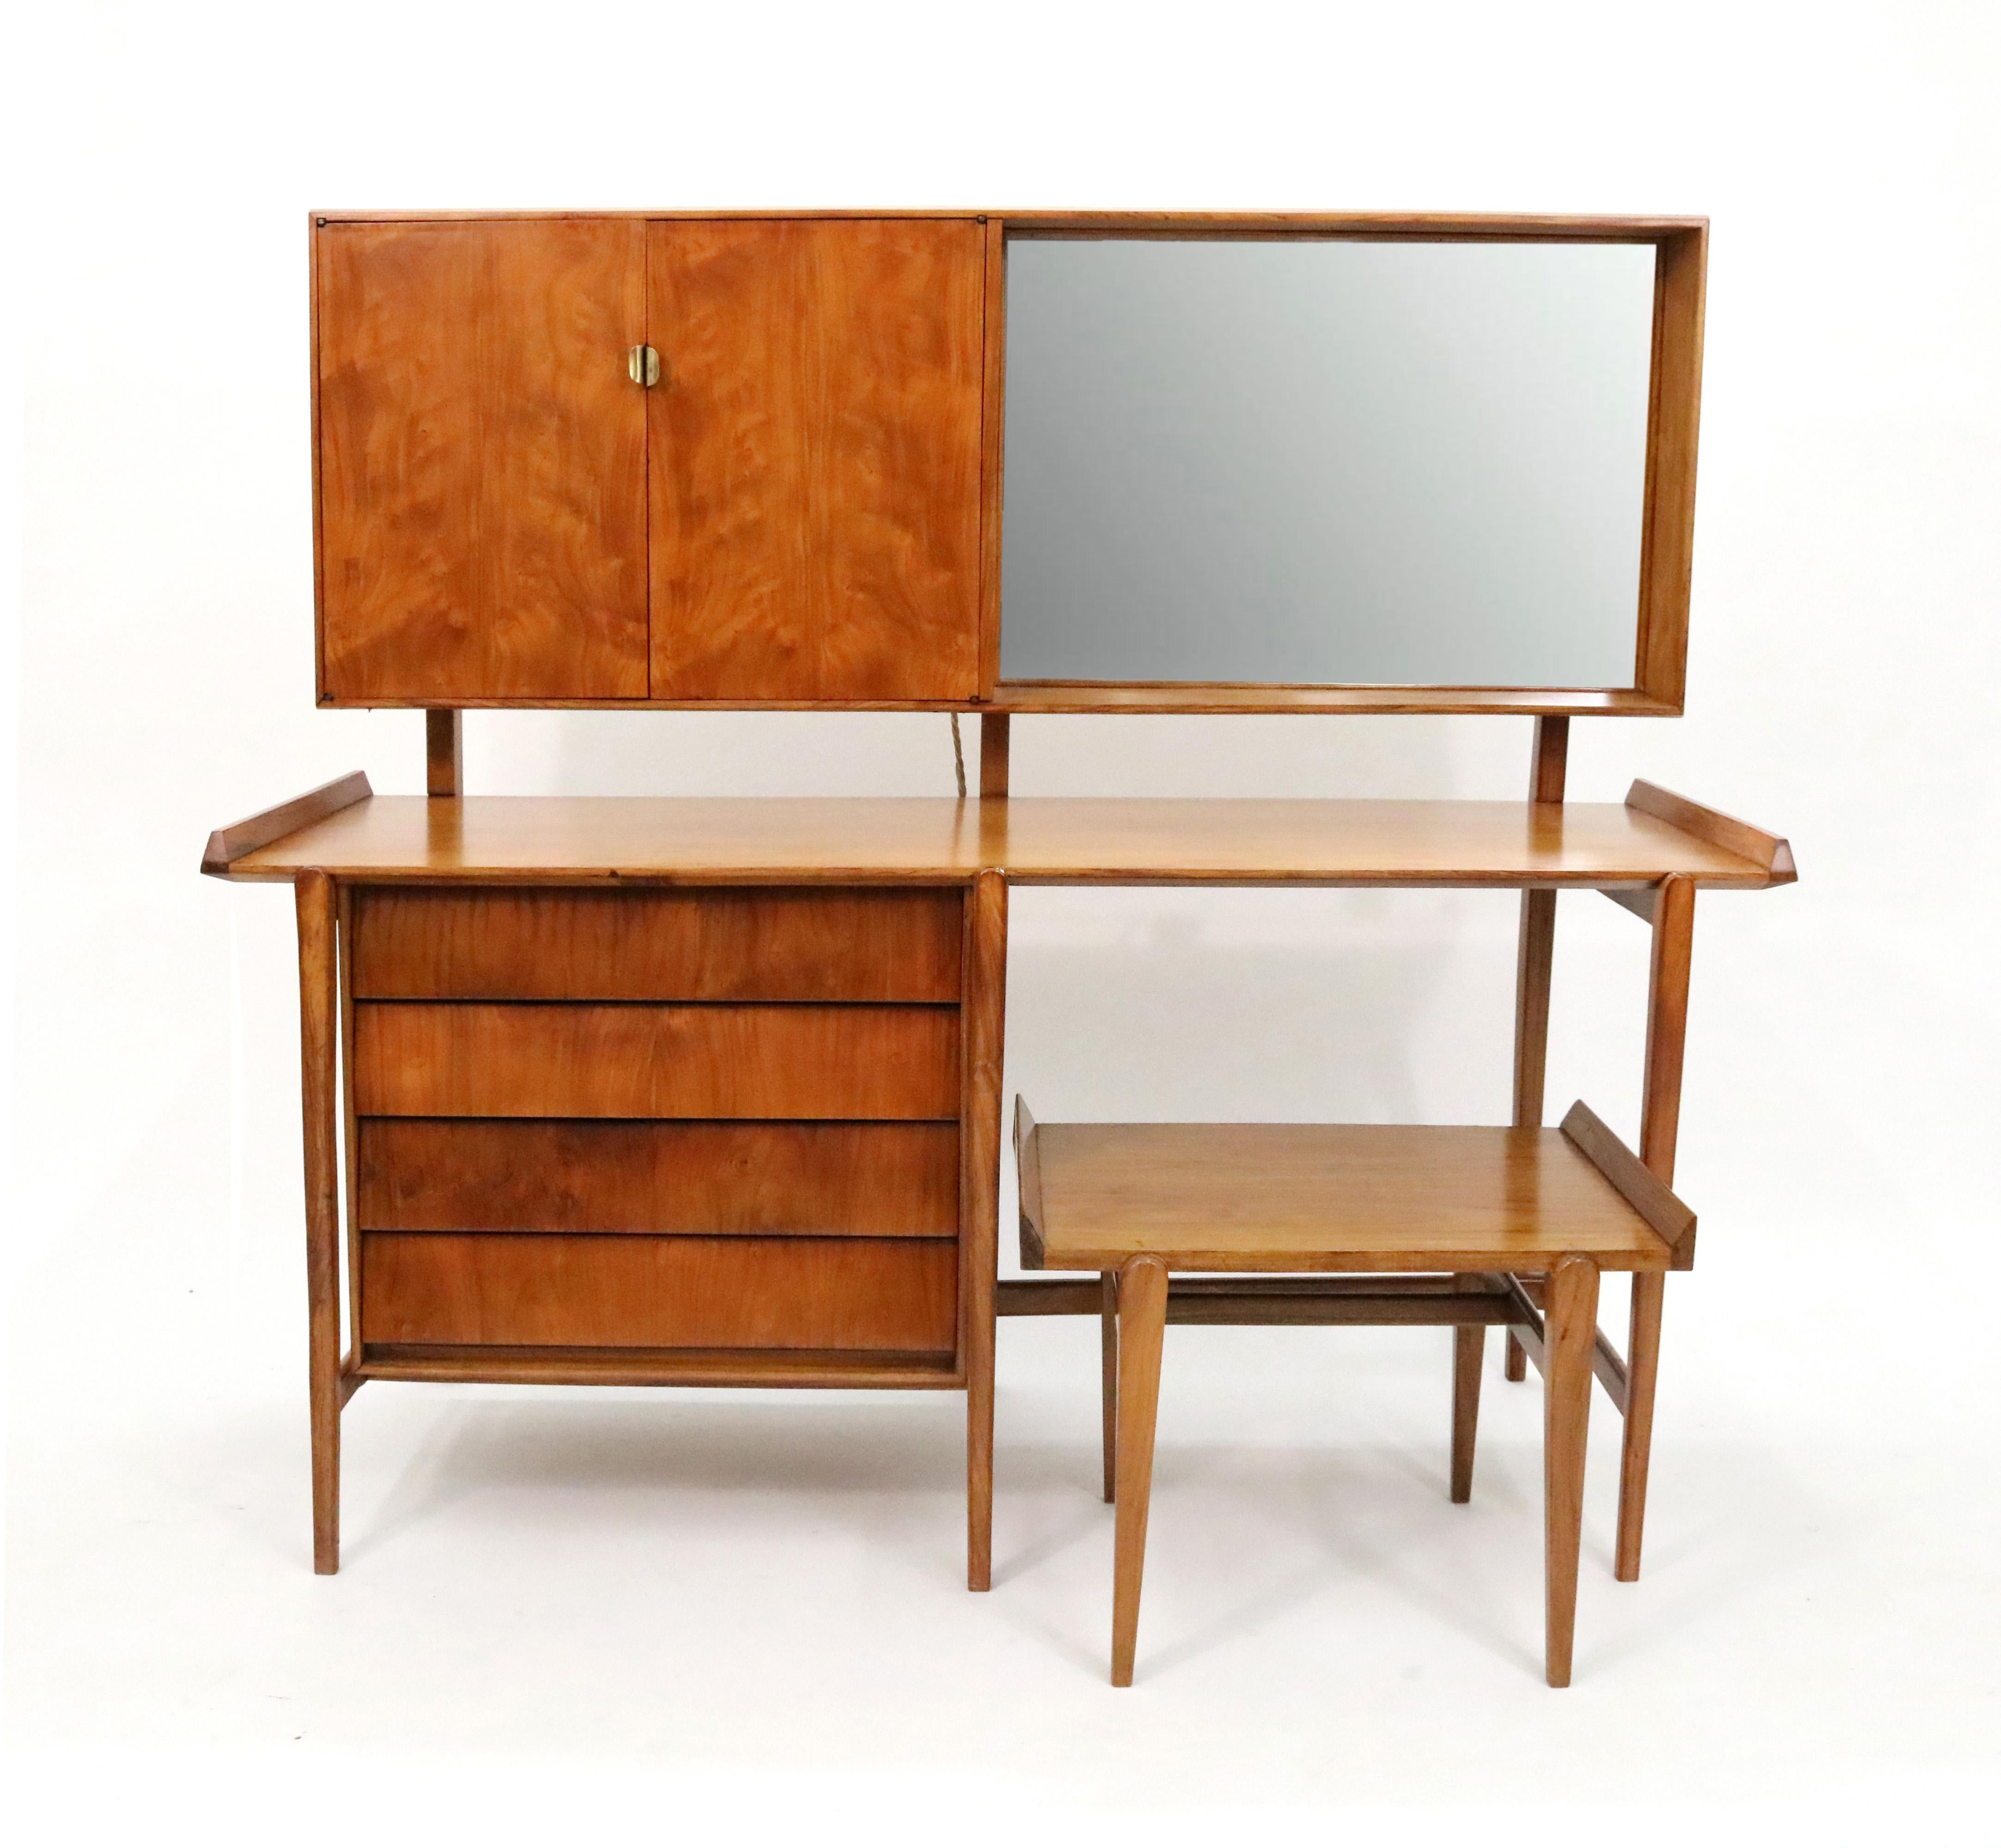 1950s vanity with bench by Carlo Hauner and Martin Eisler for Móveis e Objetos de Arte of Brazil in two beautifully contrasting and complementary exotic woods. 

A mirror light is encased in the side of the upper cabinet, currently fitted with